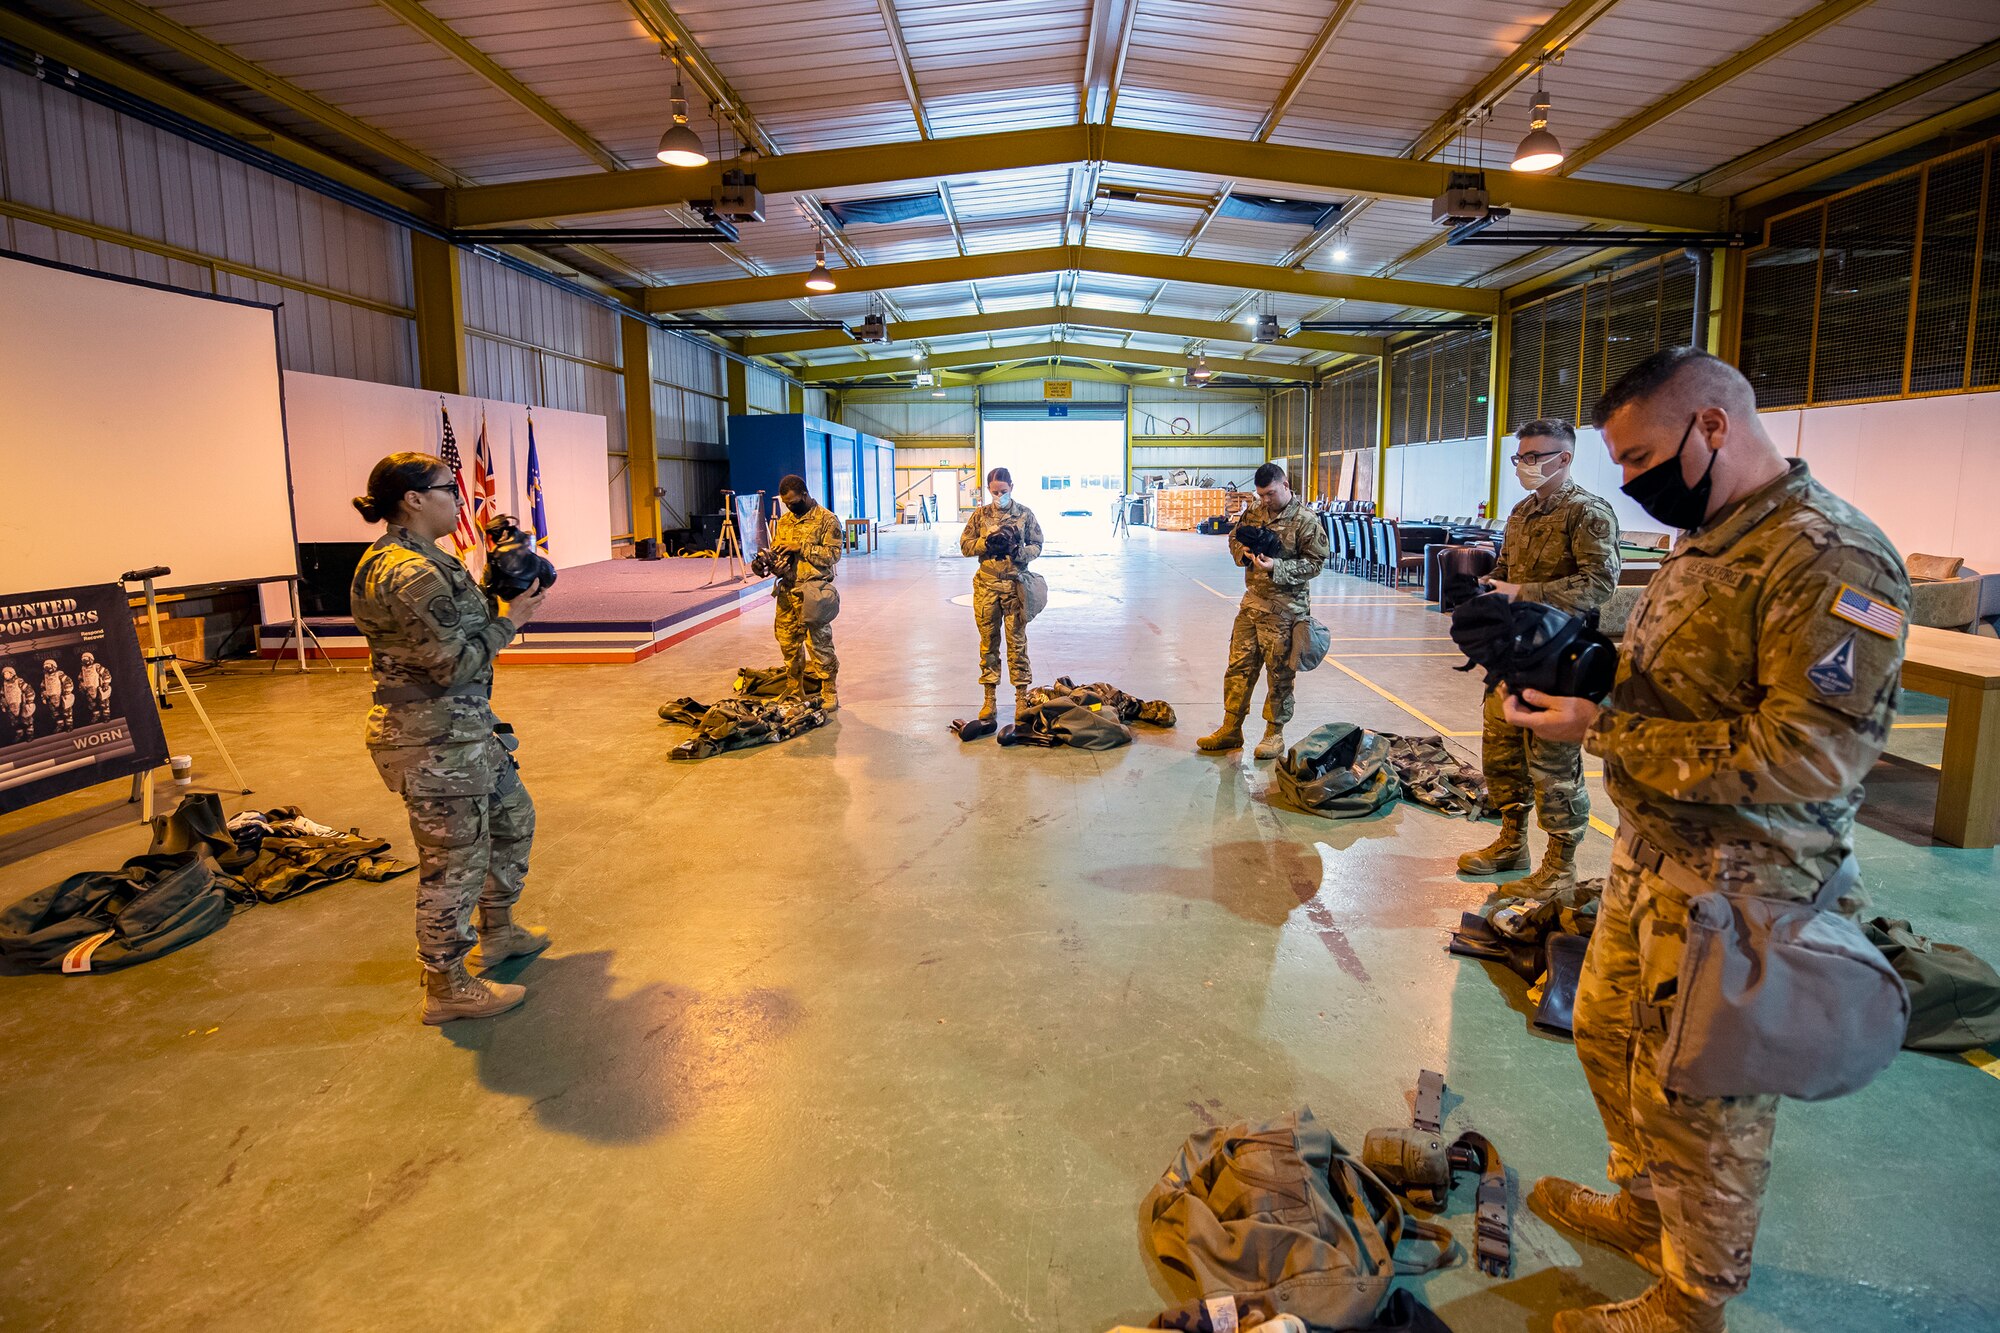 U.S. Air Force Staff Sgt. Ashley Ortiz, left, 423d Civil Engineer Squadron emergency manager, gives instruction on how to don a gas mask during Ability to Survive and Operate training at RAF Alconbury, England, Aug. 27, 2021. The ATSO rodeo was designed to reinforce Airmen’s ability to properly utilize their MOPP gear in a potential chemical environment. (U.S. Air Force photo by Senior Airman Eugene Oliver)